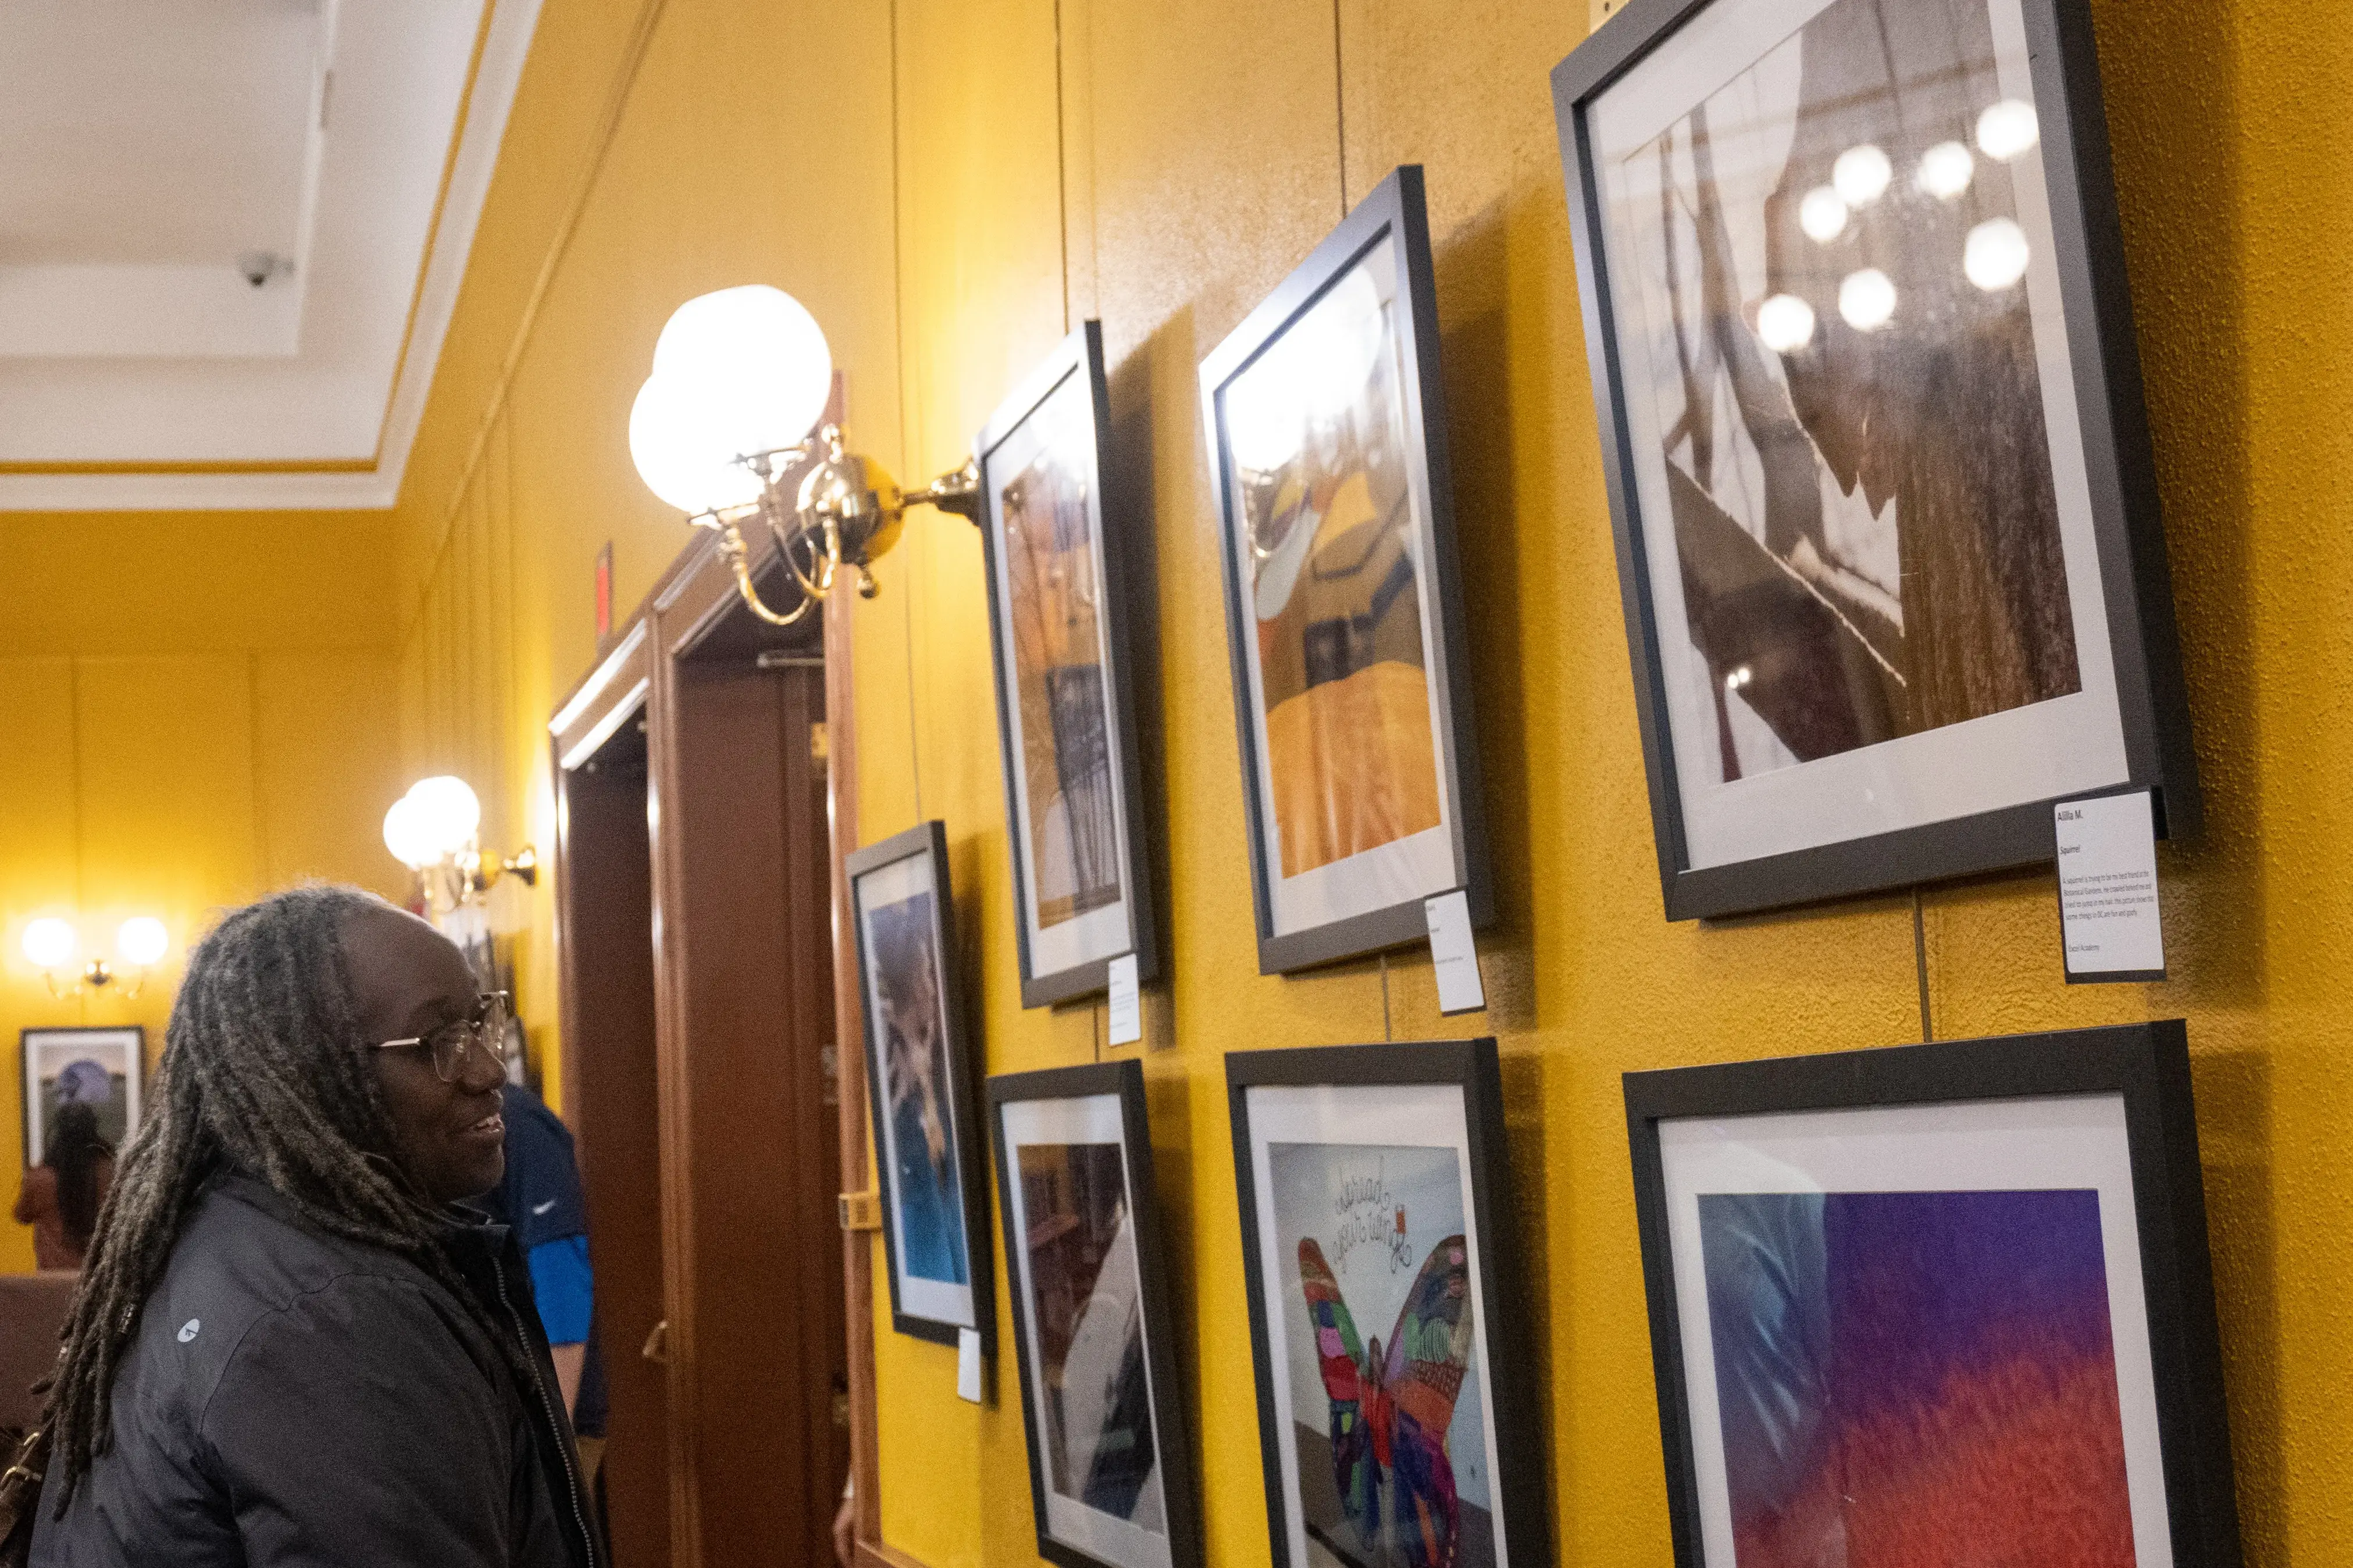 A woman with a blue jacket and braids looks at a wall of framed photos in the Everyday DC gallery